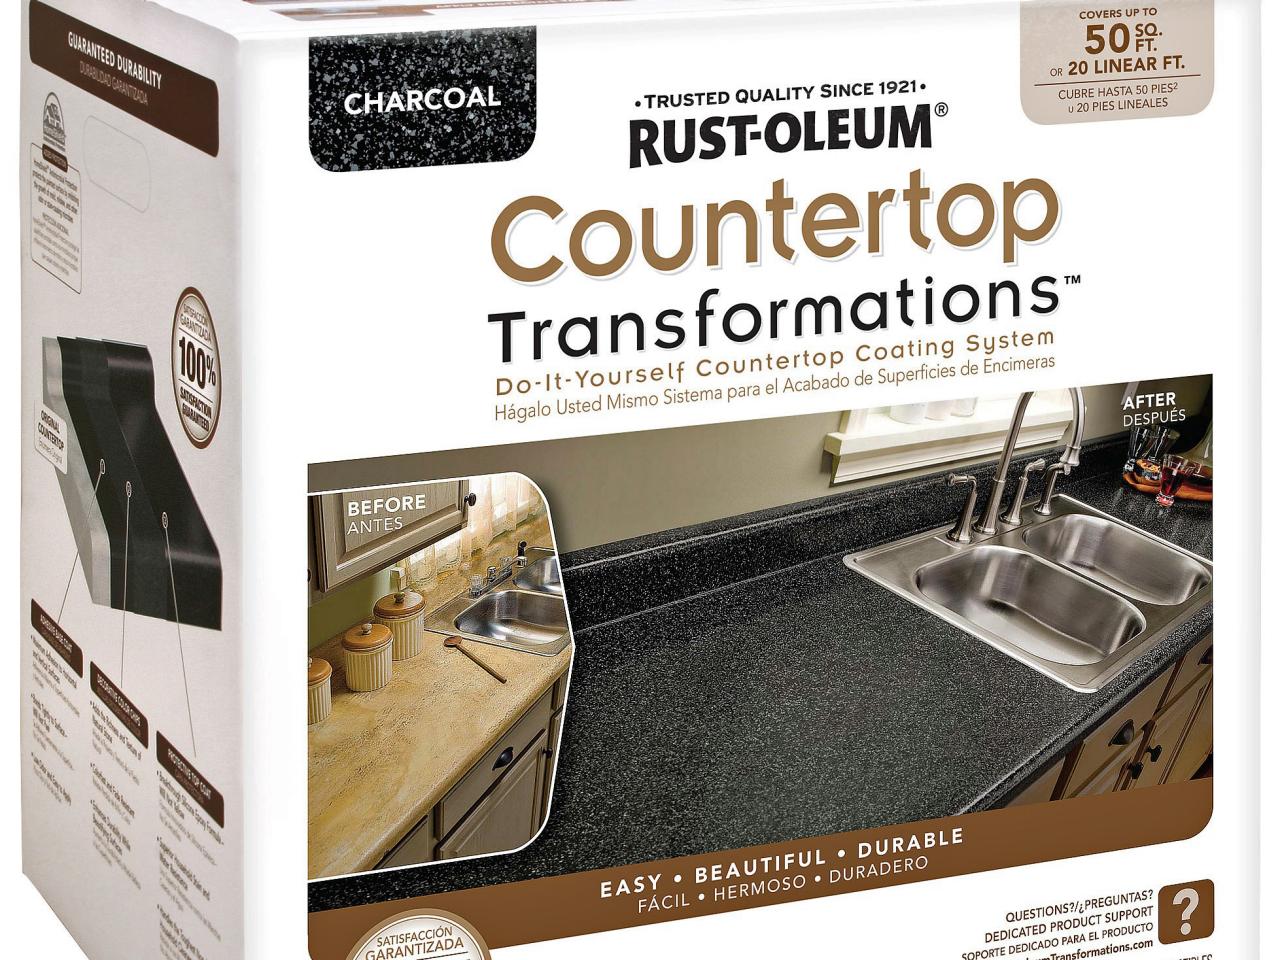 Paint Laminate Kitchen Countertops Diy, Can You Paint Formica Countertops